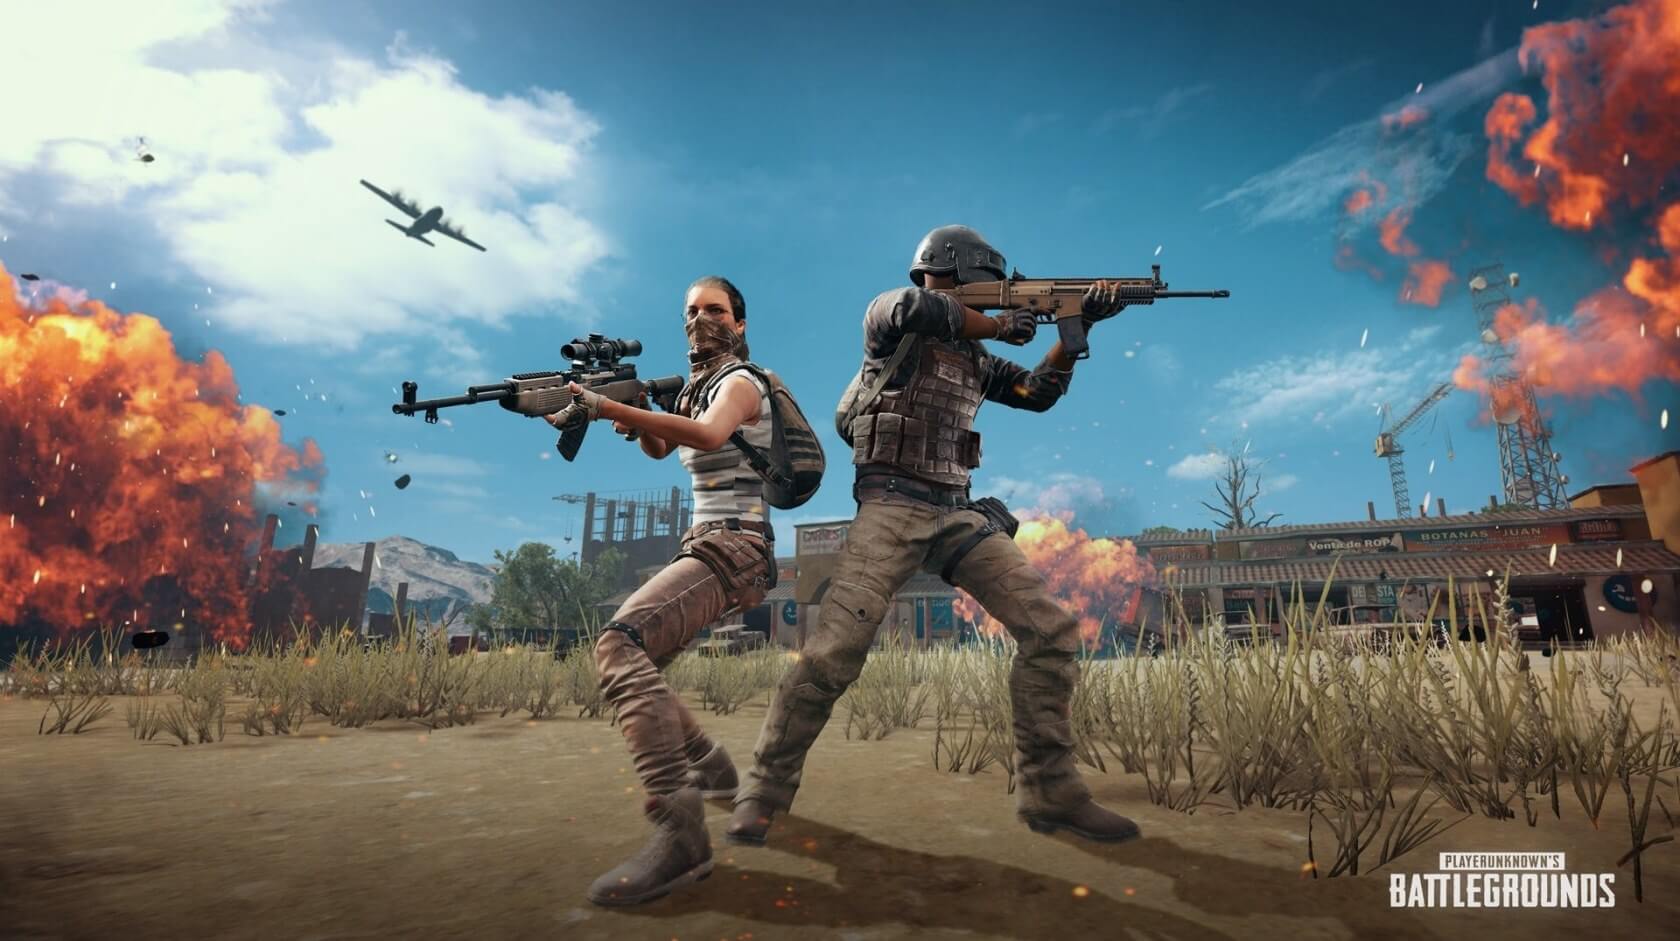 PUBG custom matches are free during beta but may be a 'premium feature' later